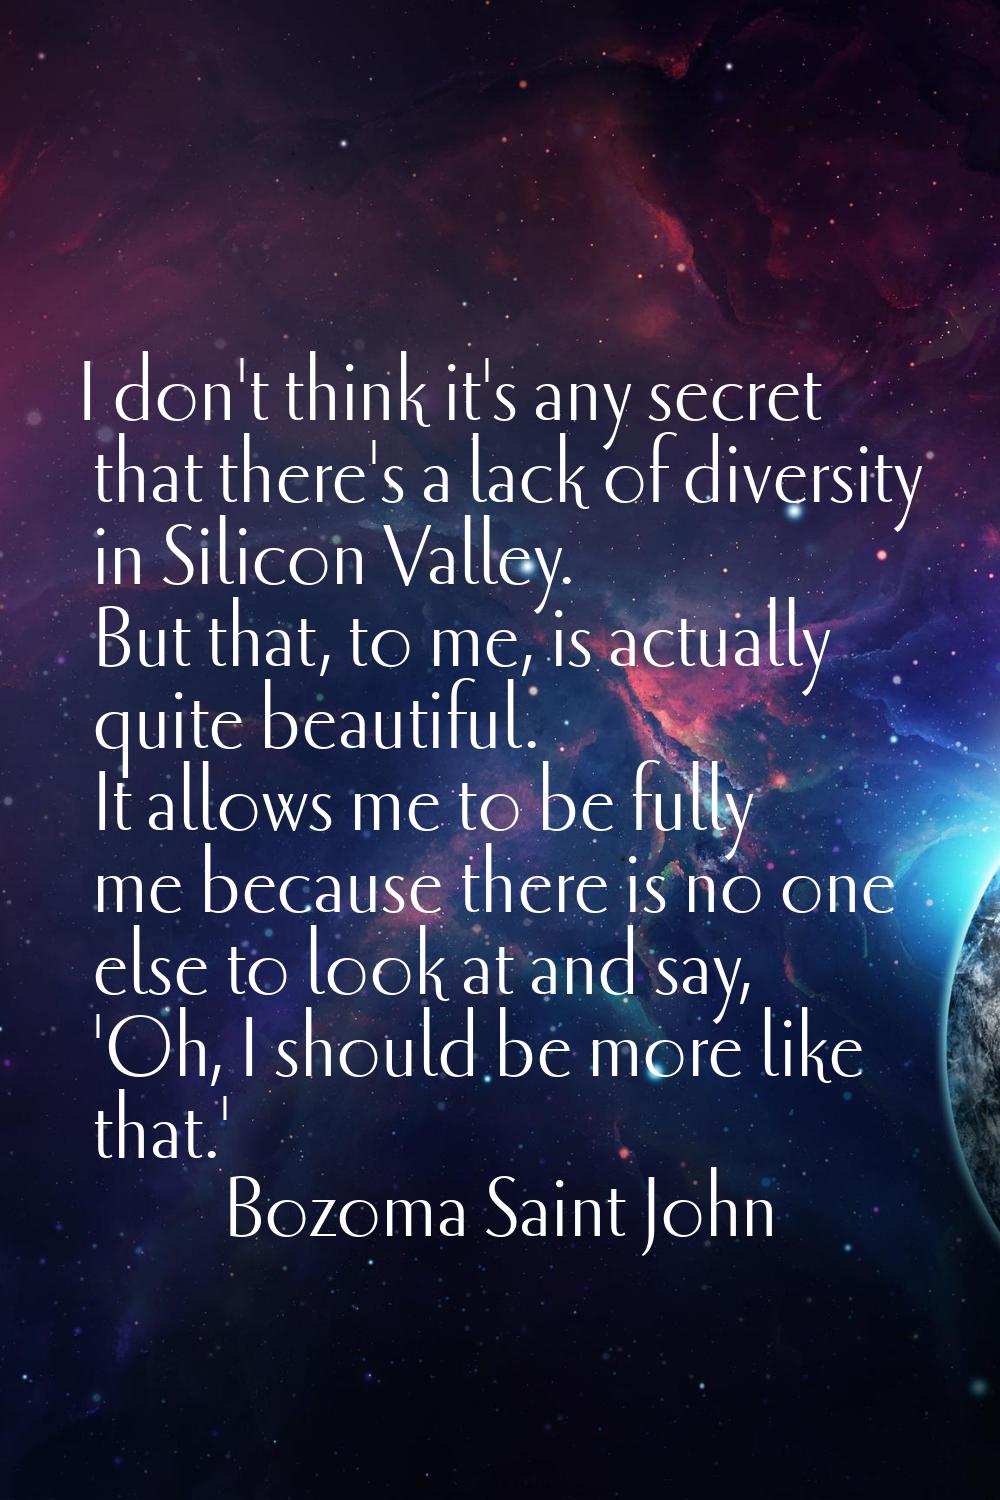 I don't think it's any secret that there's a lack of diversity in Silicon Valley. But that, to me, 